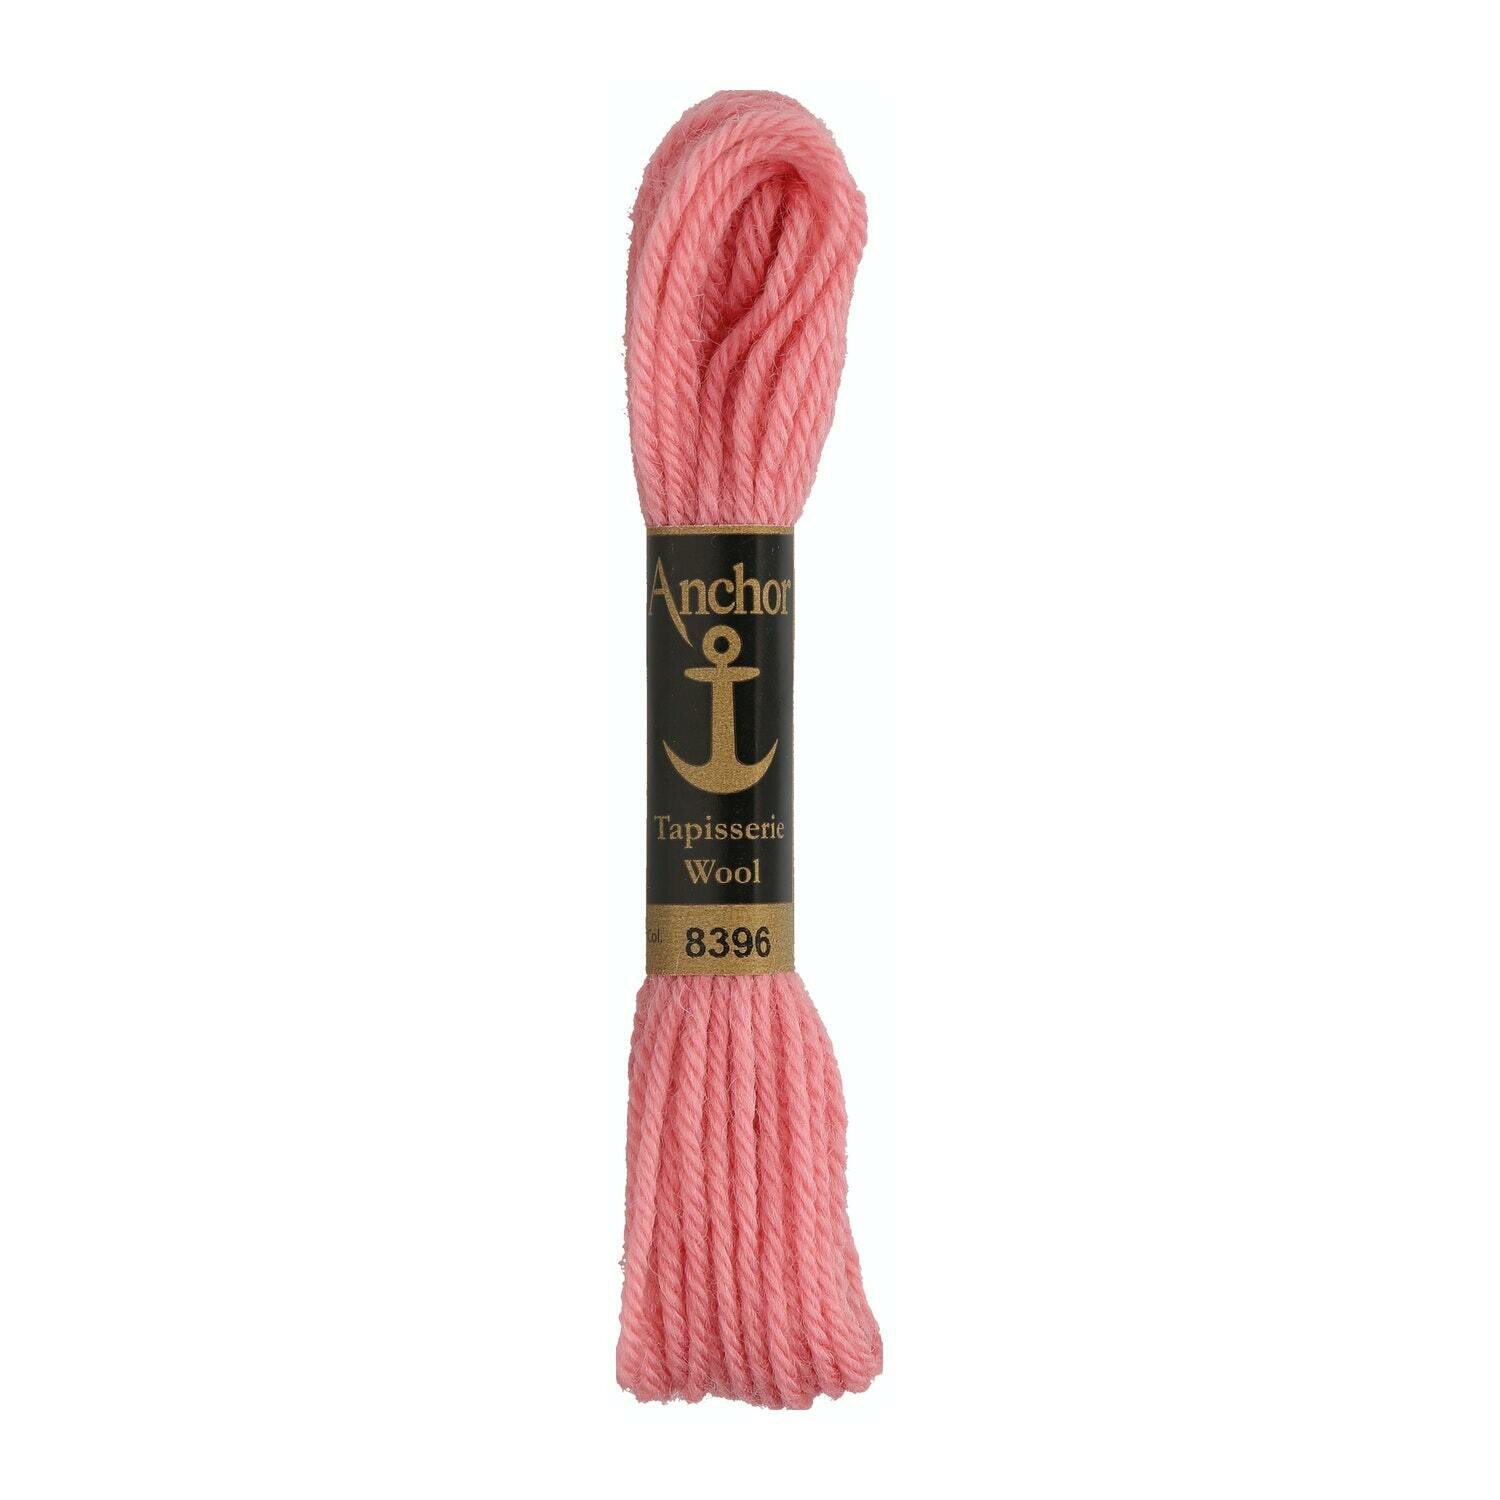 Anchor Tapisserie Wool #  08396